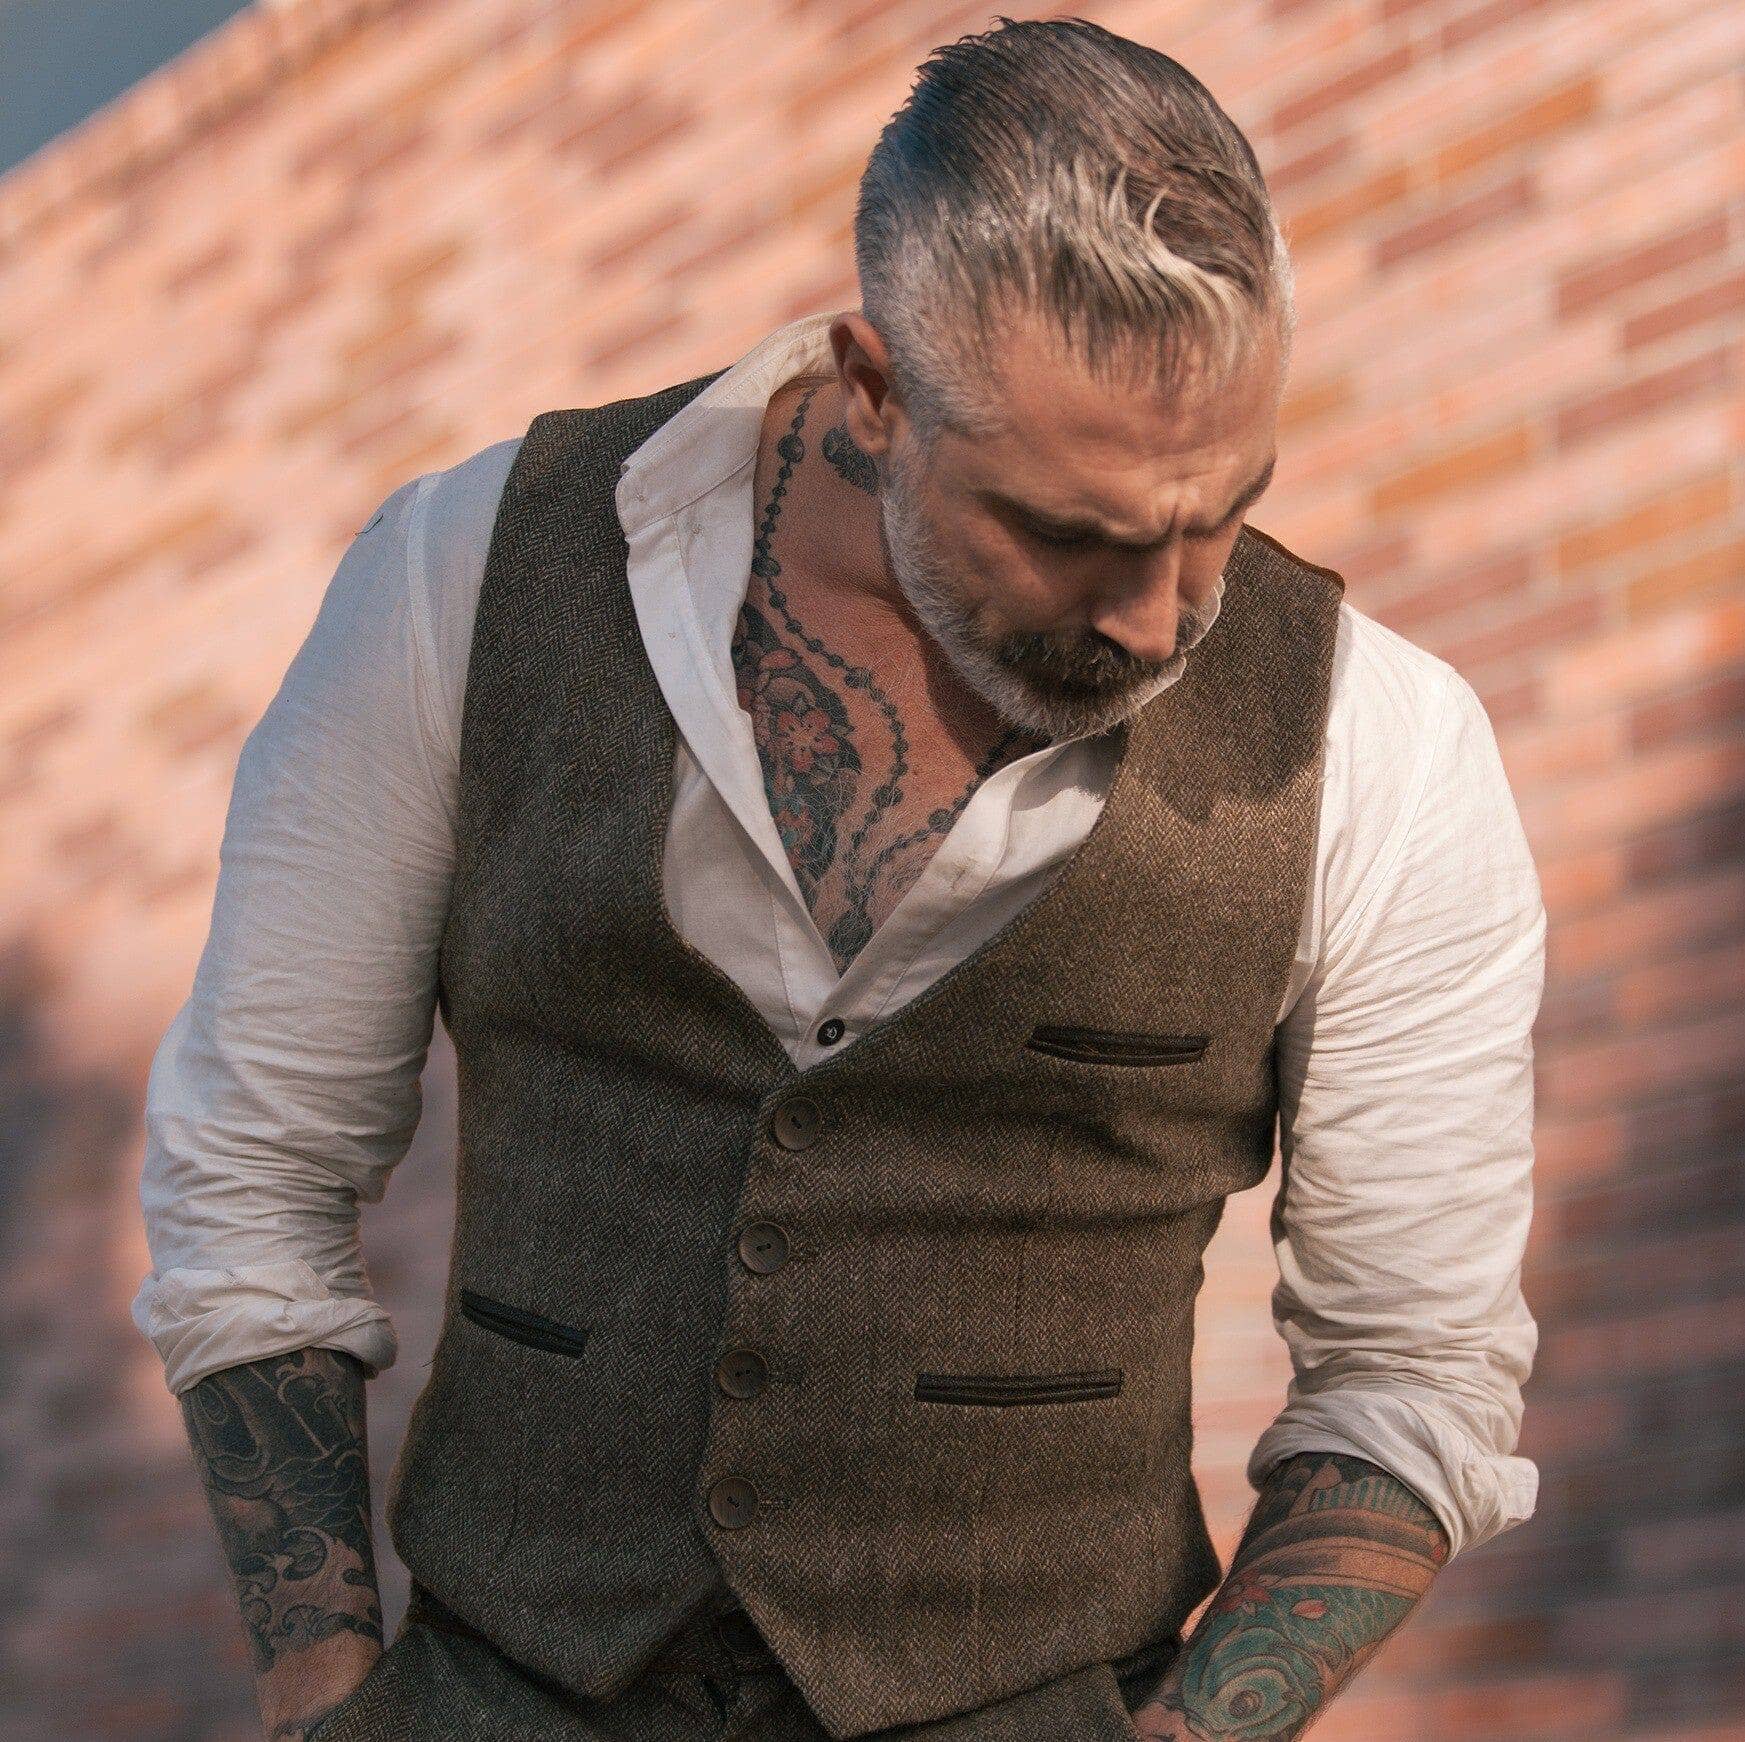 The Classic V-neck Waistcoat - Sheehan and Co.